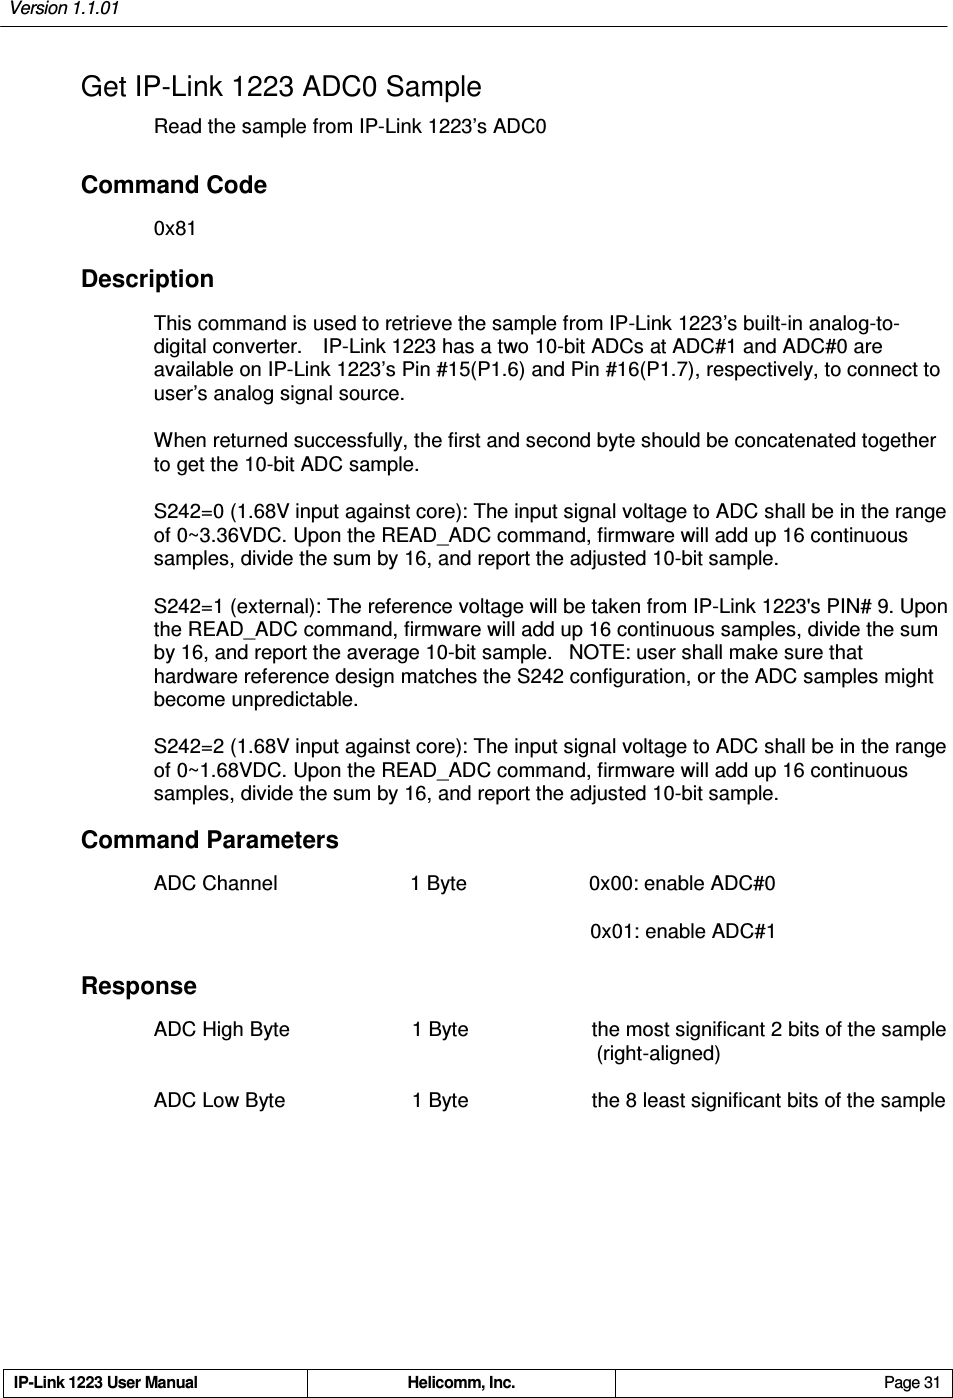 Version 1.1.01     IP-Link 1223 User Manual  Helicomm, Inc.  Page 31   Get IP-Link 1223 ADC0 Sample Read the sample from IP-Link 1223’s ADC0 Command Code 0x81 Description This command is used to retrieve the sample from IP-Link 1223’s built-in analog-to-digital converter.    IP-Link 1223 has a two 10-bit ADCs at ADC#1 and ADC#0 are available on IP-Link 1223’s Pin #15(P1.6) and Pin #16(P1.7), respectively, to connect to user’s analog signal source.   When returned successfully, the first and second byte should be concatenated together to get the 10-bit ADC sample.   S242=0 (1.68V input against core): The input signal voltage to ADC shall be in the range of 0~3.36VDC. Upon the READ_ADC command, firmware will add up 16 continuous samples, divide the sum by 16, and report the adjusted 10-bit sample. S242=1 (external): The reference voltage will be taken from IP-Link 1223&apos;s PIN# 9. Upon the READ_ADC command, firmware will add up 16 continuous samples, divide the sum by 16, and report the average 10-bit sample.   NOTE: user shall make sure that hardware reference design matches the S242 configuration, or the ADC samples might become unpredictable. S242=2 (1.68V input against core): The input signal voltage to ADC shall be in the range of 0~1.68VDC. Upon the READ_ADC command, firmware will add up 16 continuous samples, divide the sum by 16, and report the adjusted 10-bit sample. Command Parameters ADC Channel                          1 Byte                        0x00: enable ADC#0                                                                                       0x01: enable ADC#1 Response ADC High Byte                        1 Byte    the most significant 2 bits of the sample                                                   (right-aligned) ADC Low Byte                        1 Byte    the 8 least significant bits of the sample 